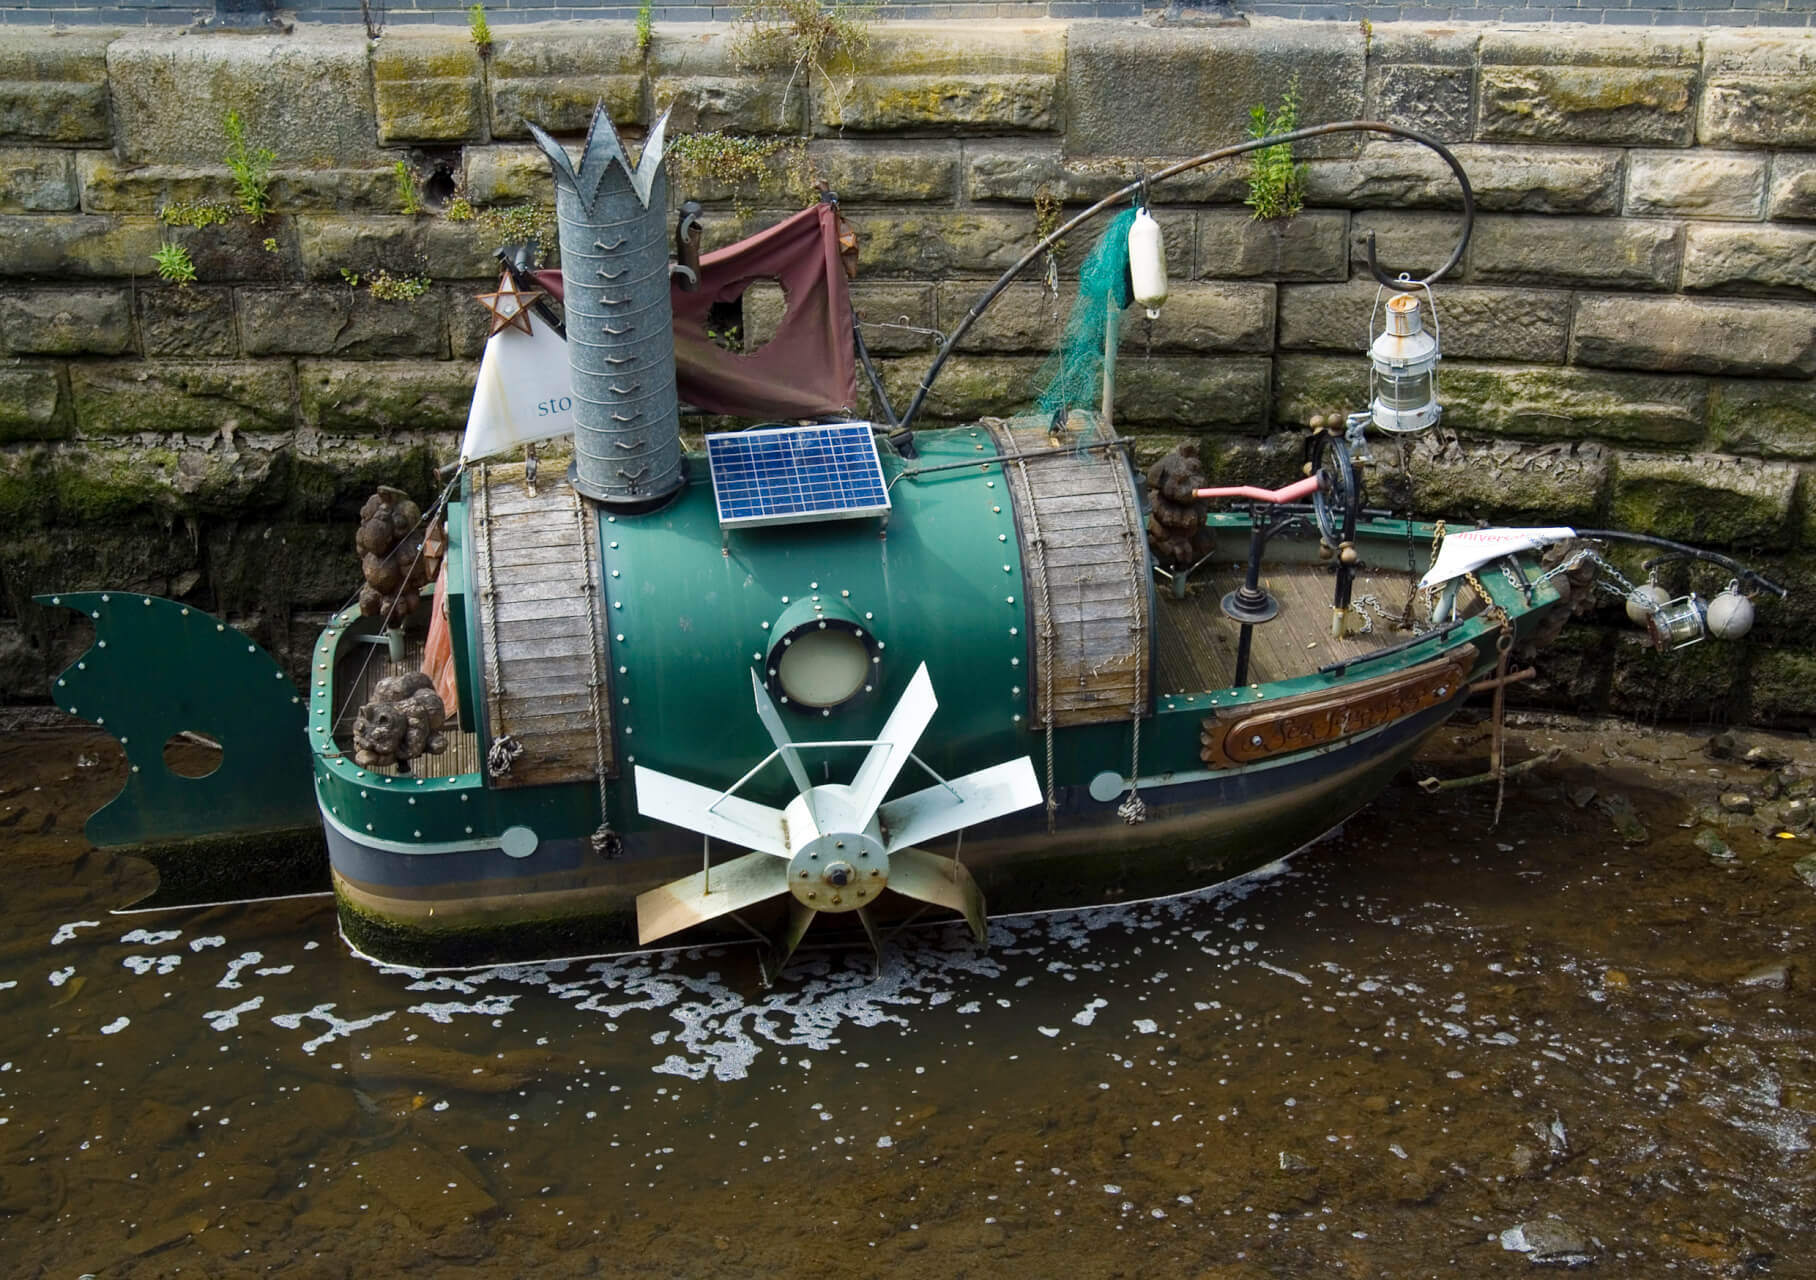 "Sea Song Sang", a magical story boat in Newcastle upon Tyne, UK, by Chinch Gryniewicz